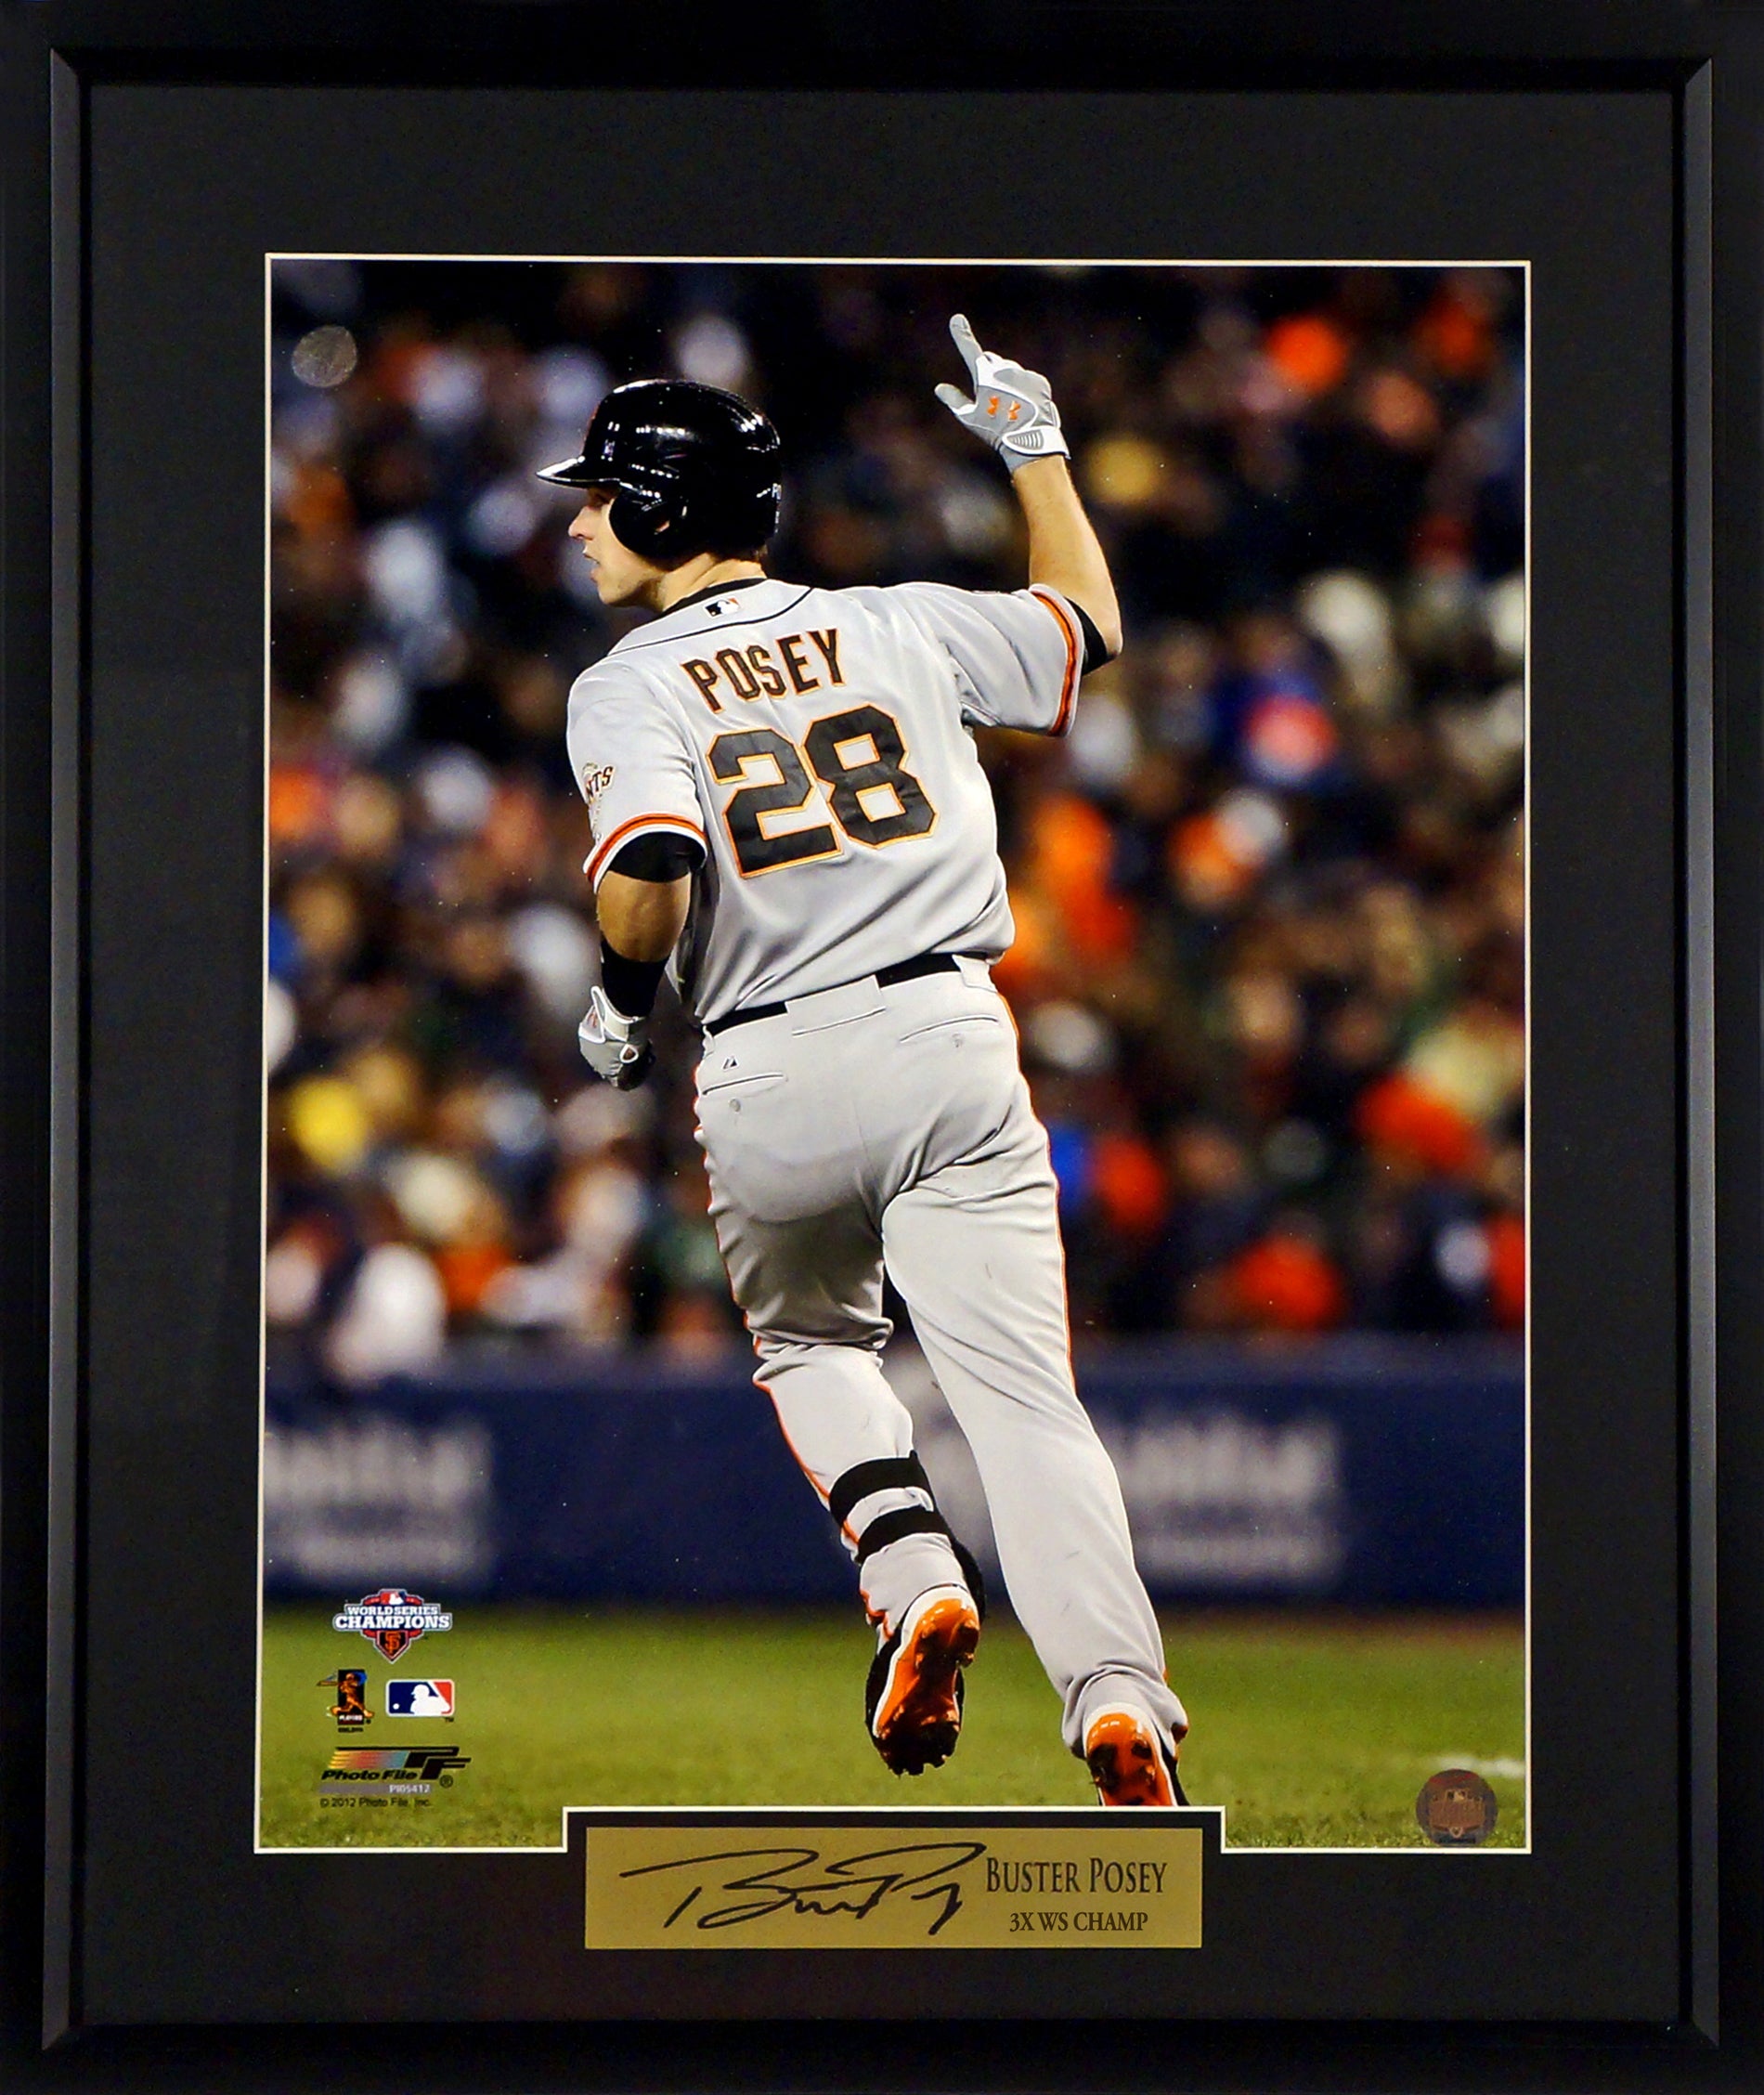 SF Giants Buster Posey 2012 WS Framed Photograph (Engraved